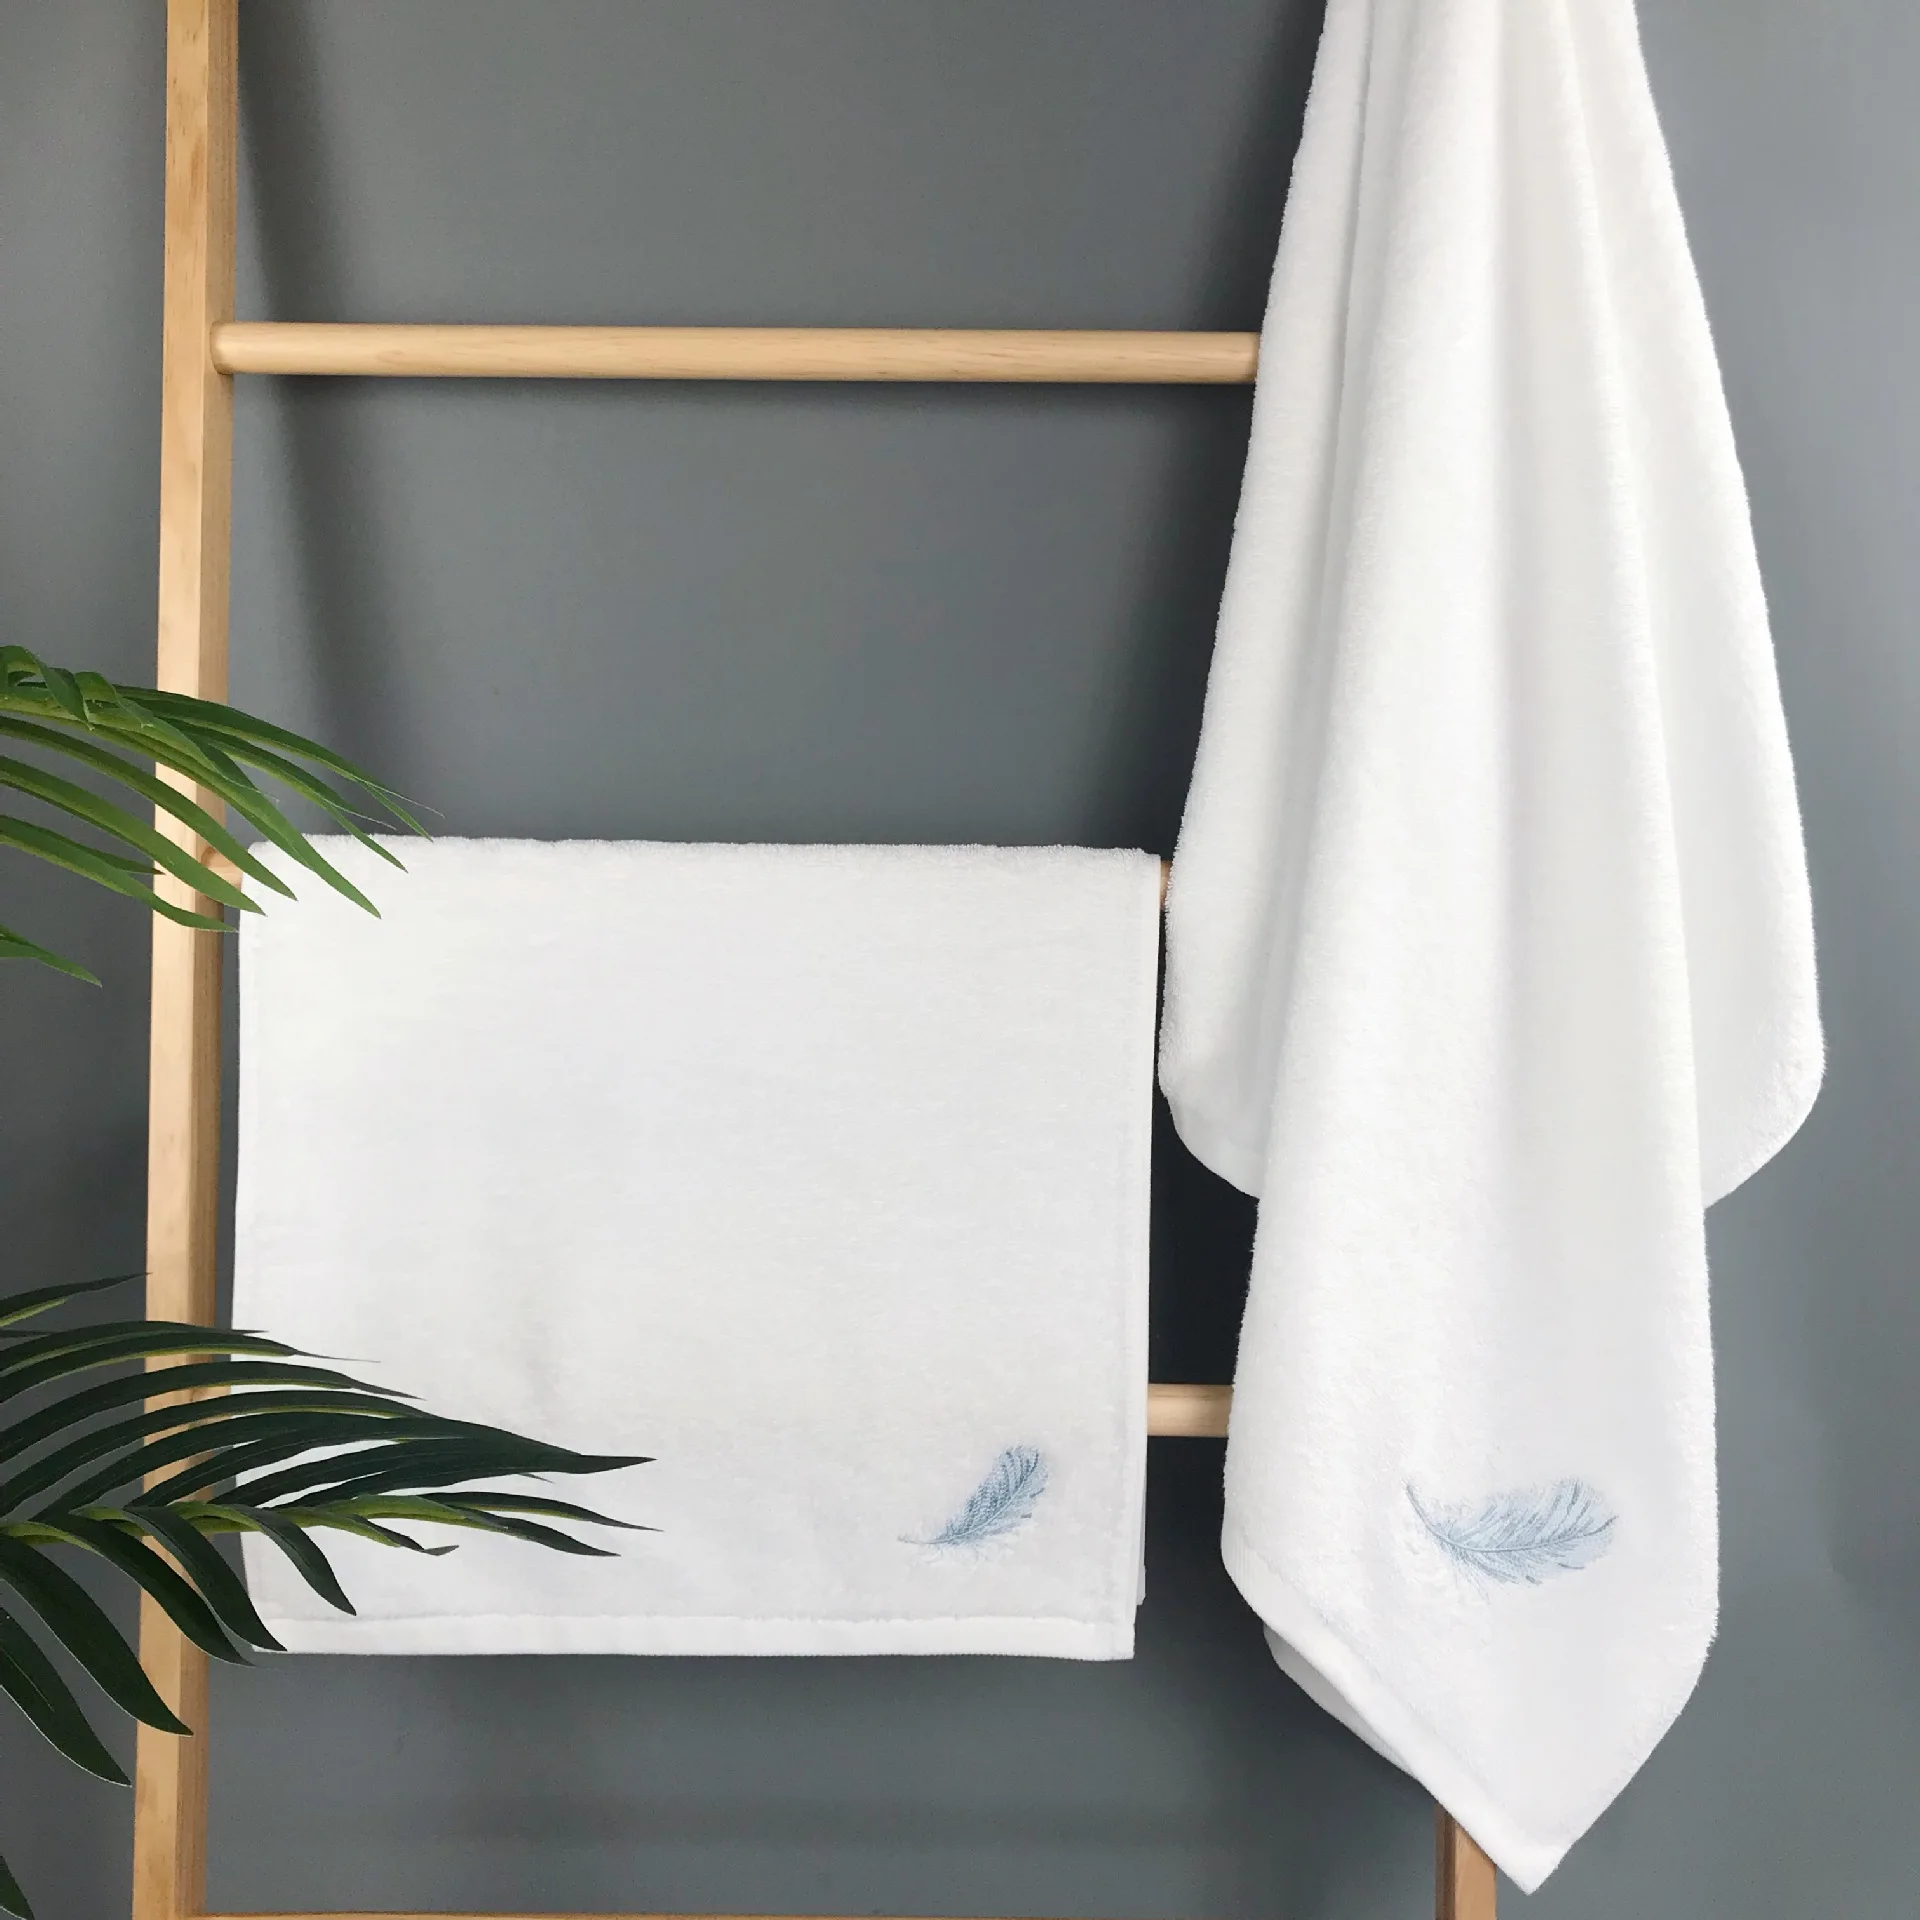 https://ae01.alicdn.com/kf/S7fc357c8d3da456aa492c35d92c7b7e99/Feather-Embroidered-Cotton-Towel-Solid-Color-Soft-Absorbent-Men-s-and-Women-s-Household-Towel-Bath.jpg